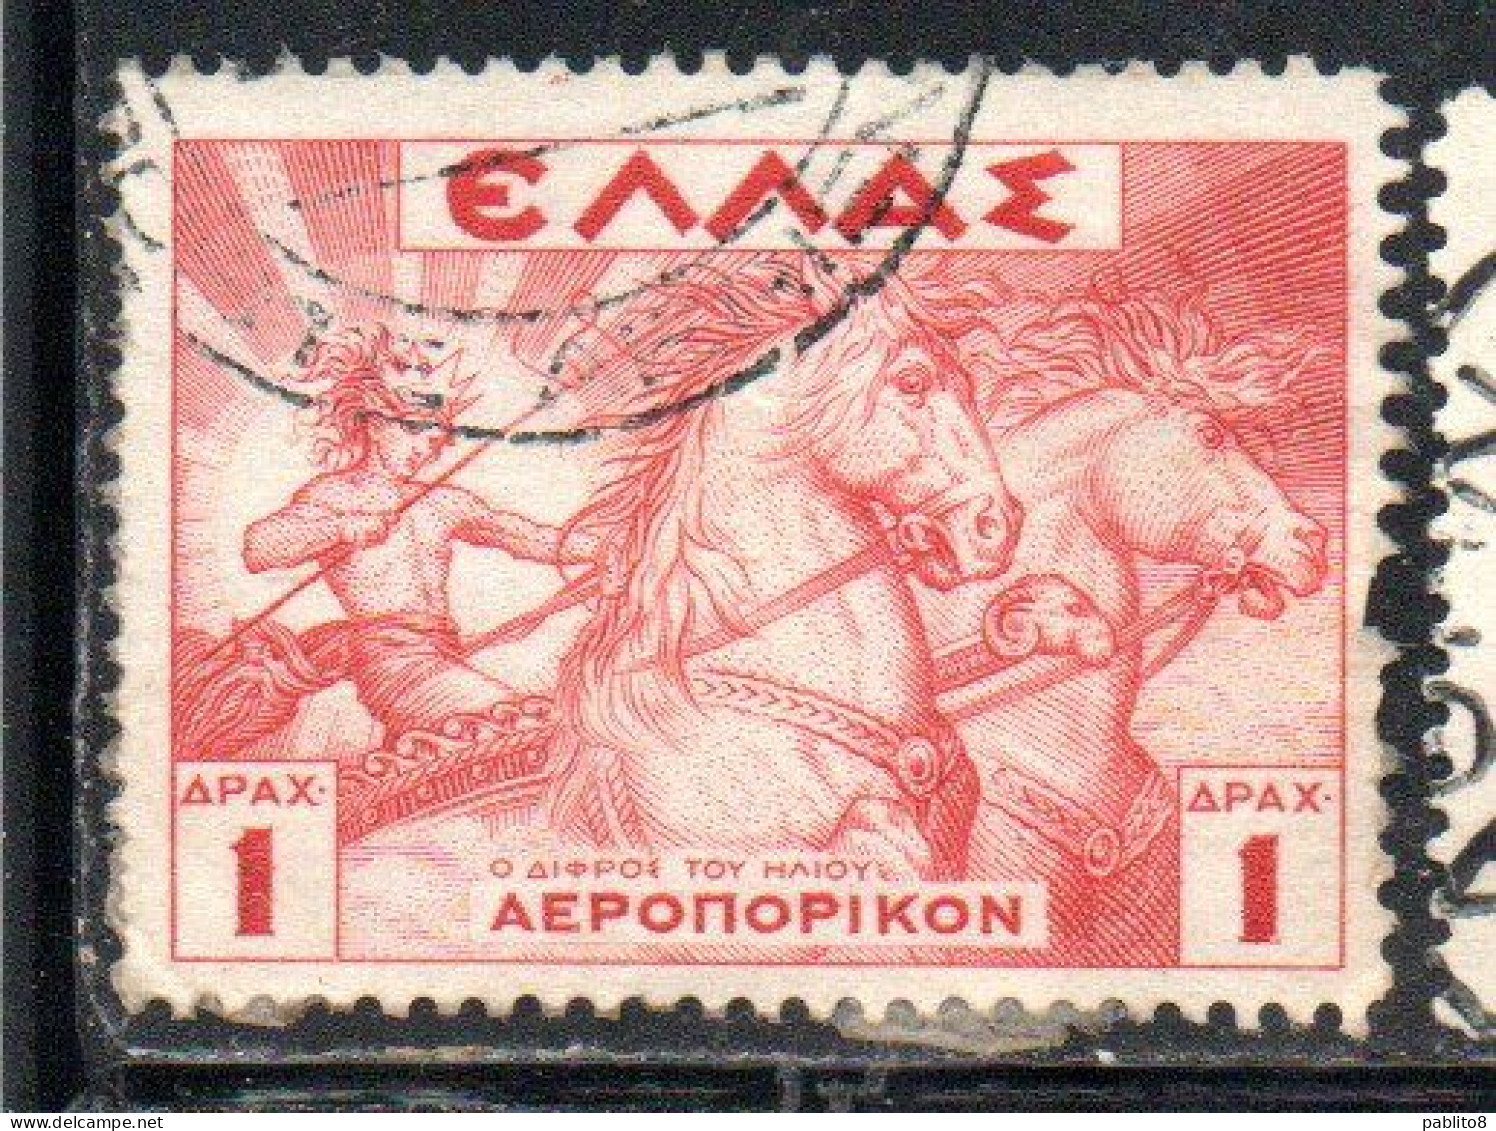 GREECE GRECIA ELLAS 1935 AIR POST MAIL AIRMAIL MYTHOLOGICAL HELIOS DRIVING THE SUN CHARIOT 1d USED USATO OBLITERE' - Gebruikt